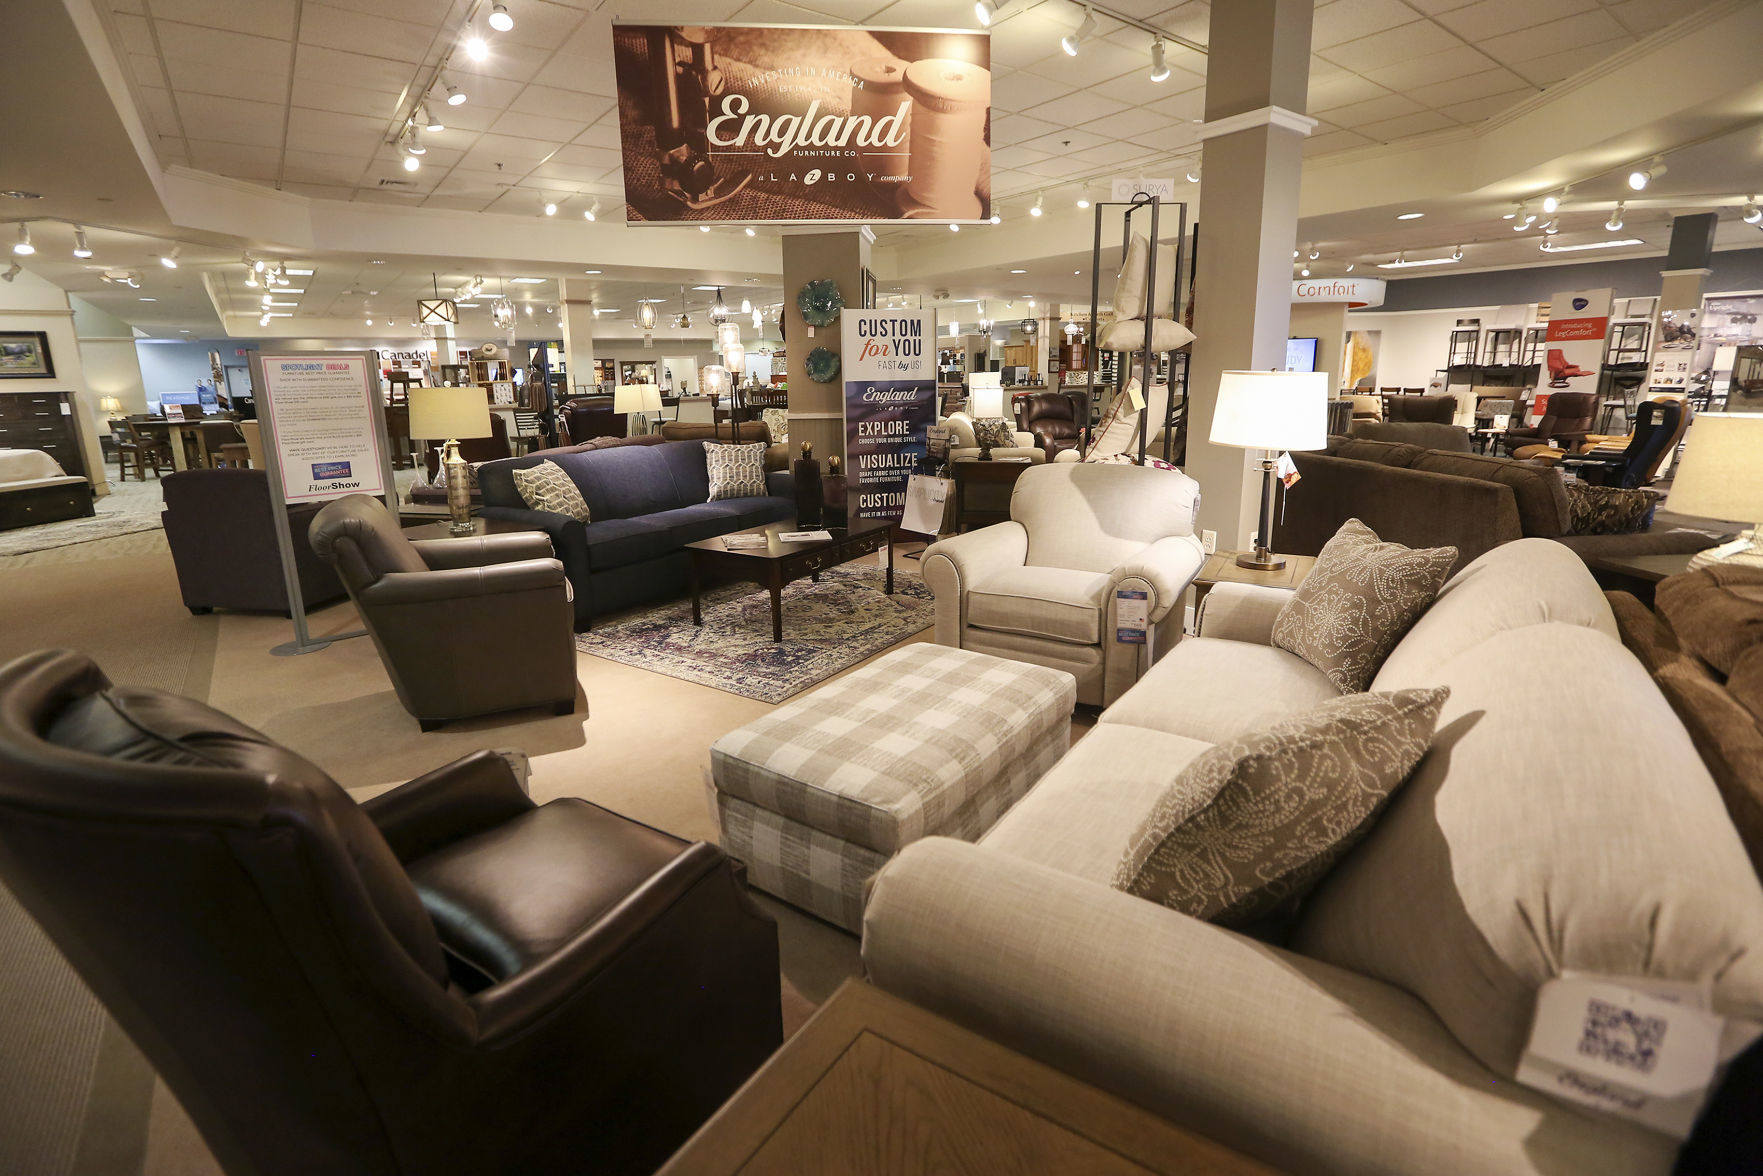 A new furniture brand at FloorShow Furniture & Flooring in Dubuque on Friday, Oct. 4, 2019. FloorShow will have a branding change on Monday, when the company will officially become known as Home + Floor Show. PHOTO CREDIT: NICKI KOHL